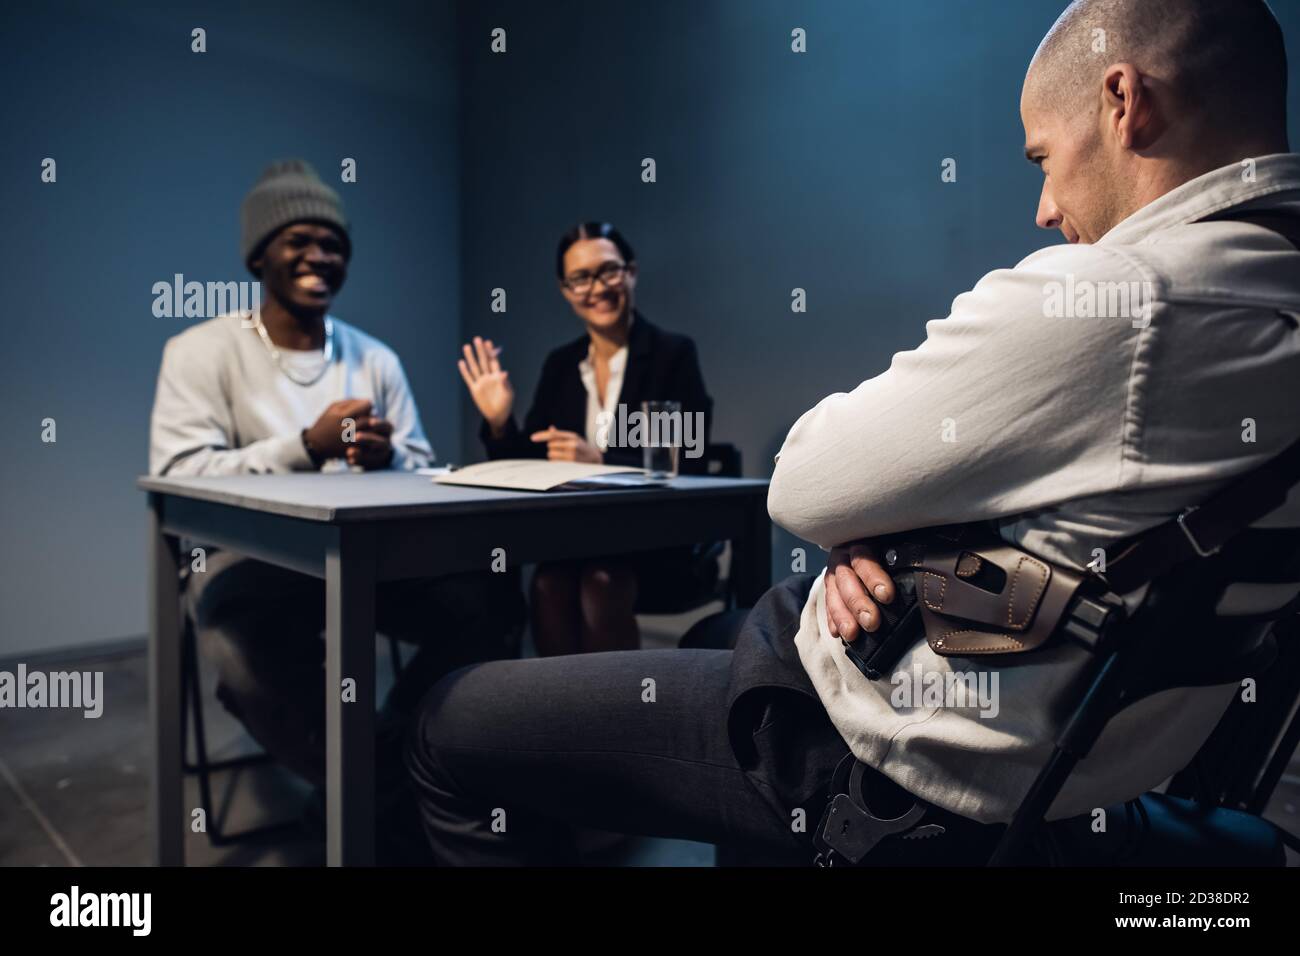 Airport security has detained a black man with a package of cocaine and is conducting an interrogation in a specially equipped room. Stock Photo